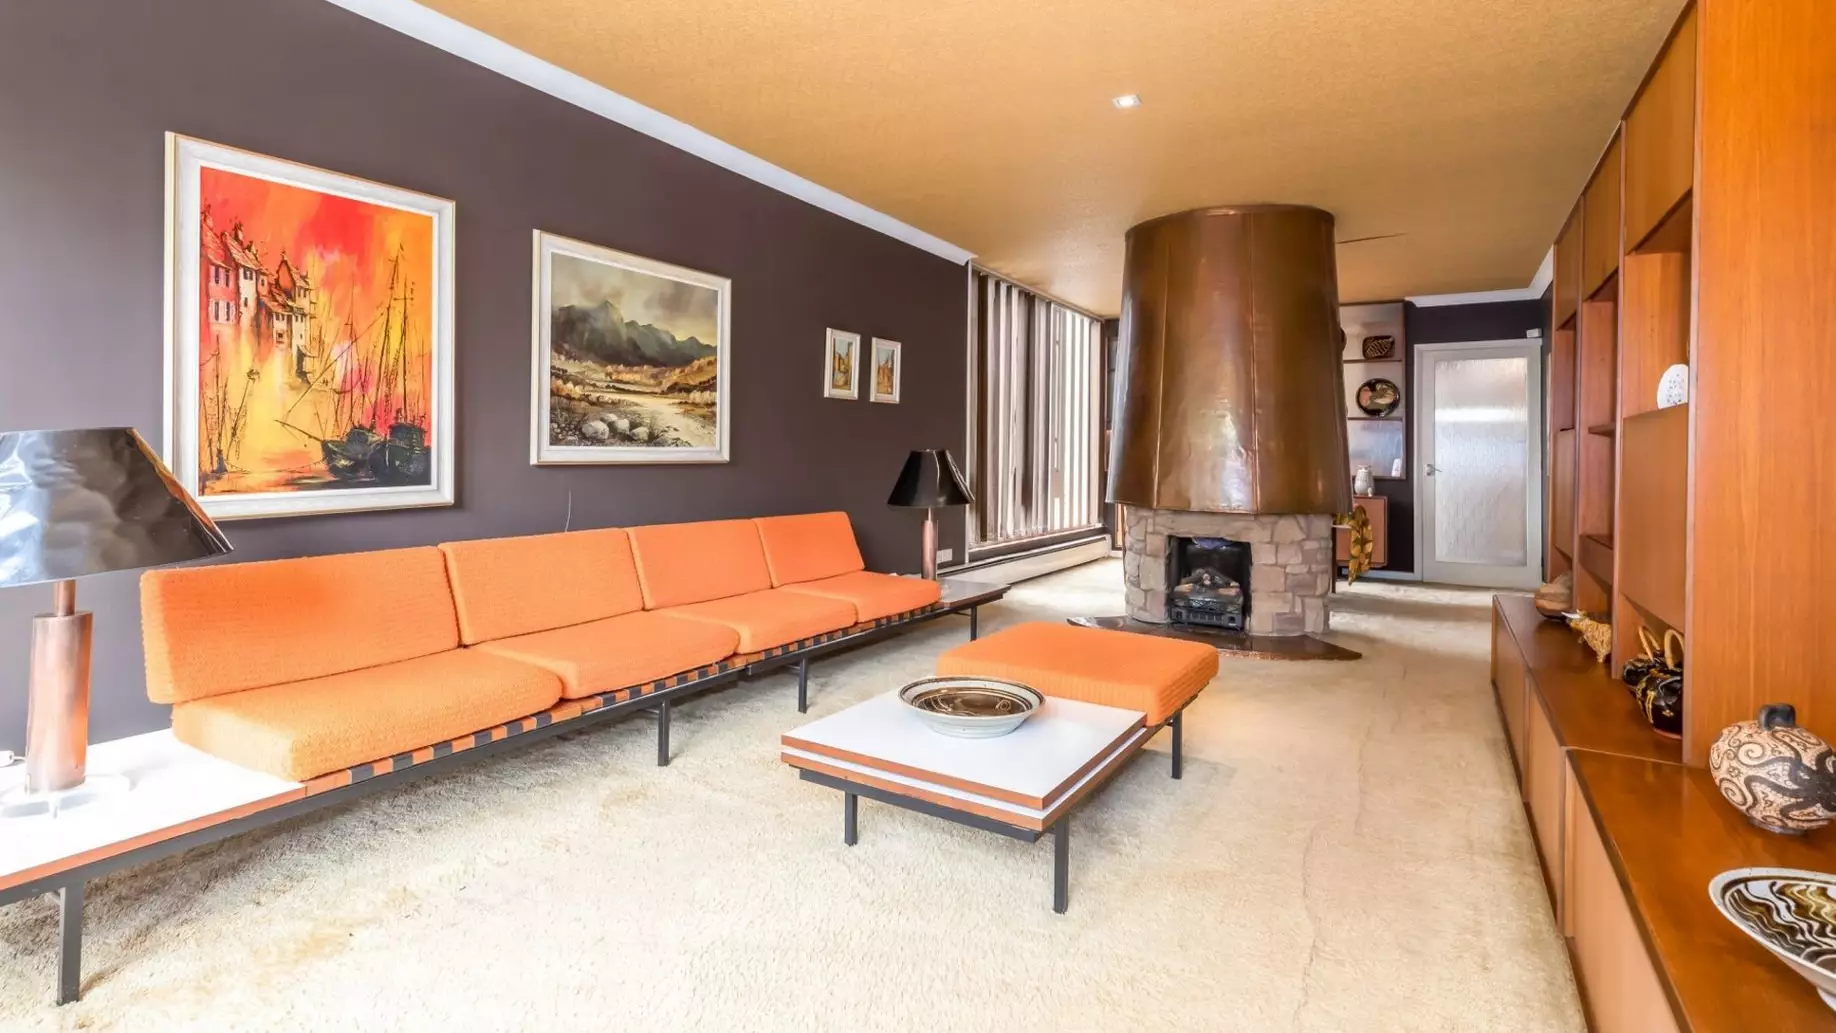 Photos Show Incredible '70s-Style Home On Sale For The First Time